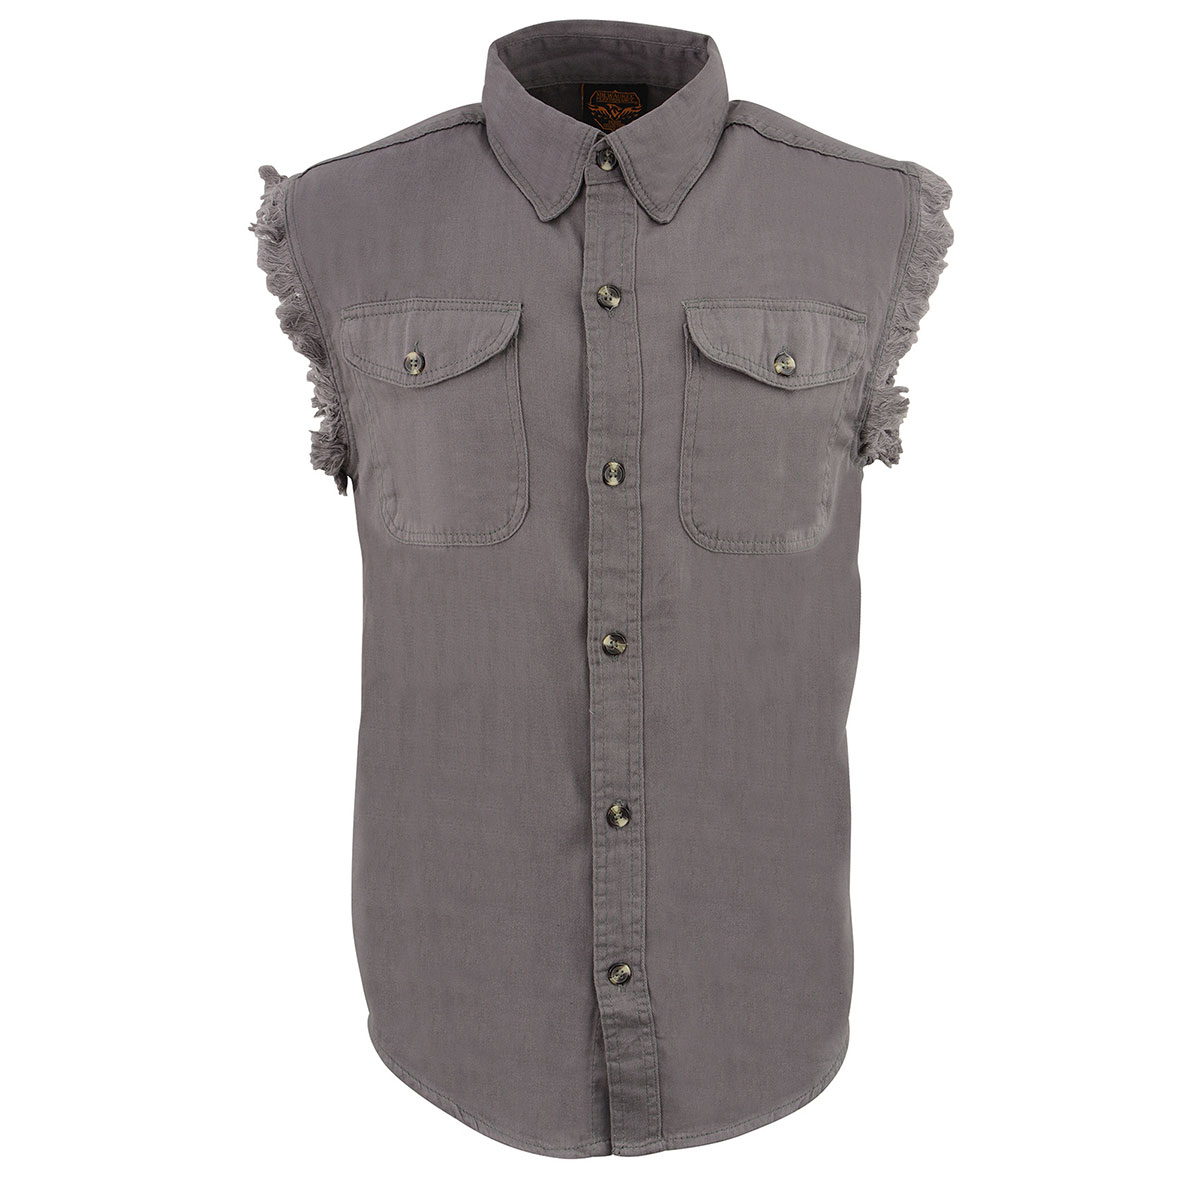 Milwaukee Leather DM4004 Men's Grey Lightweight Denim Shirt with with Frayed Cut Off Sleeveless Look 4X-Large - image 5 of 5